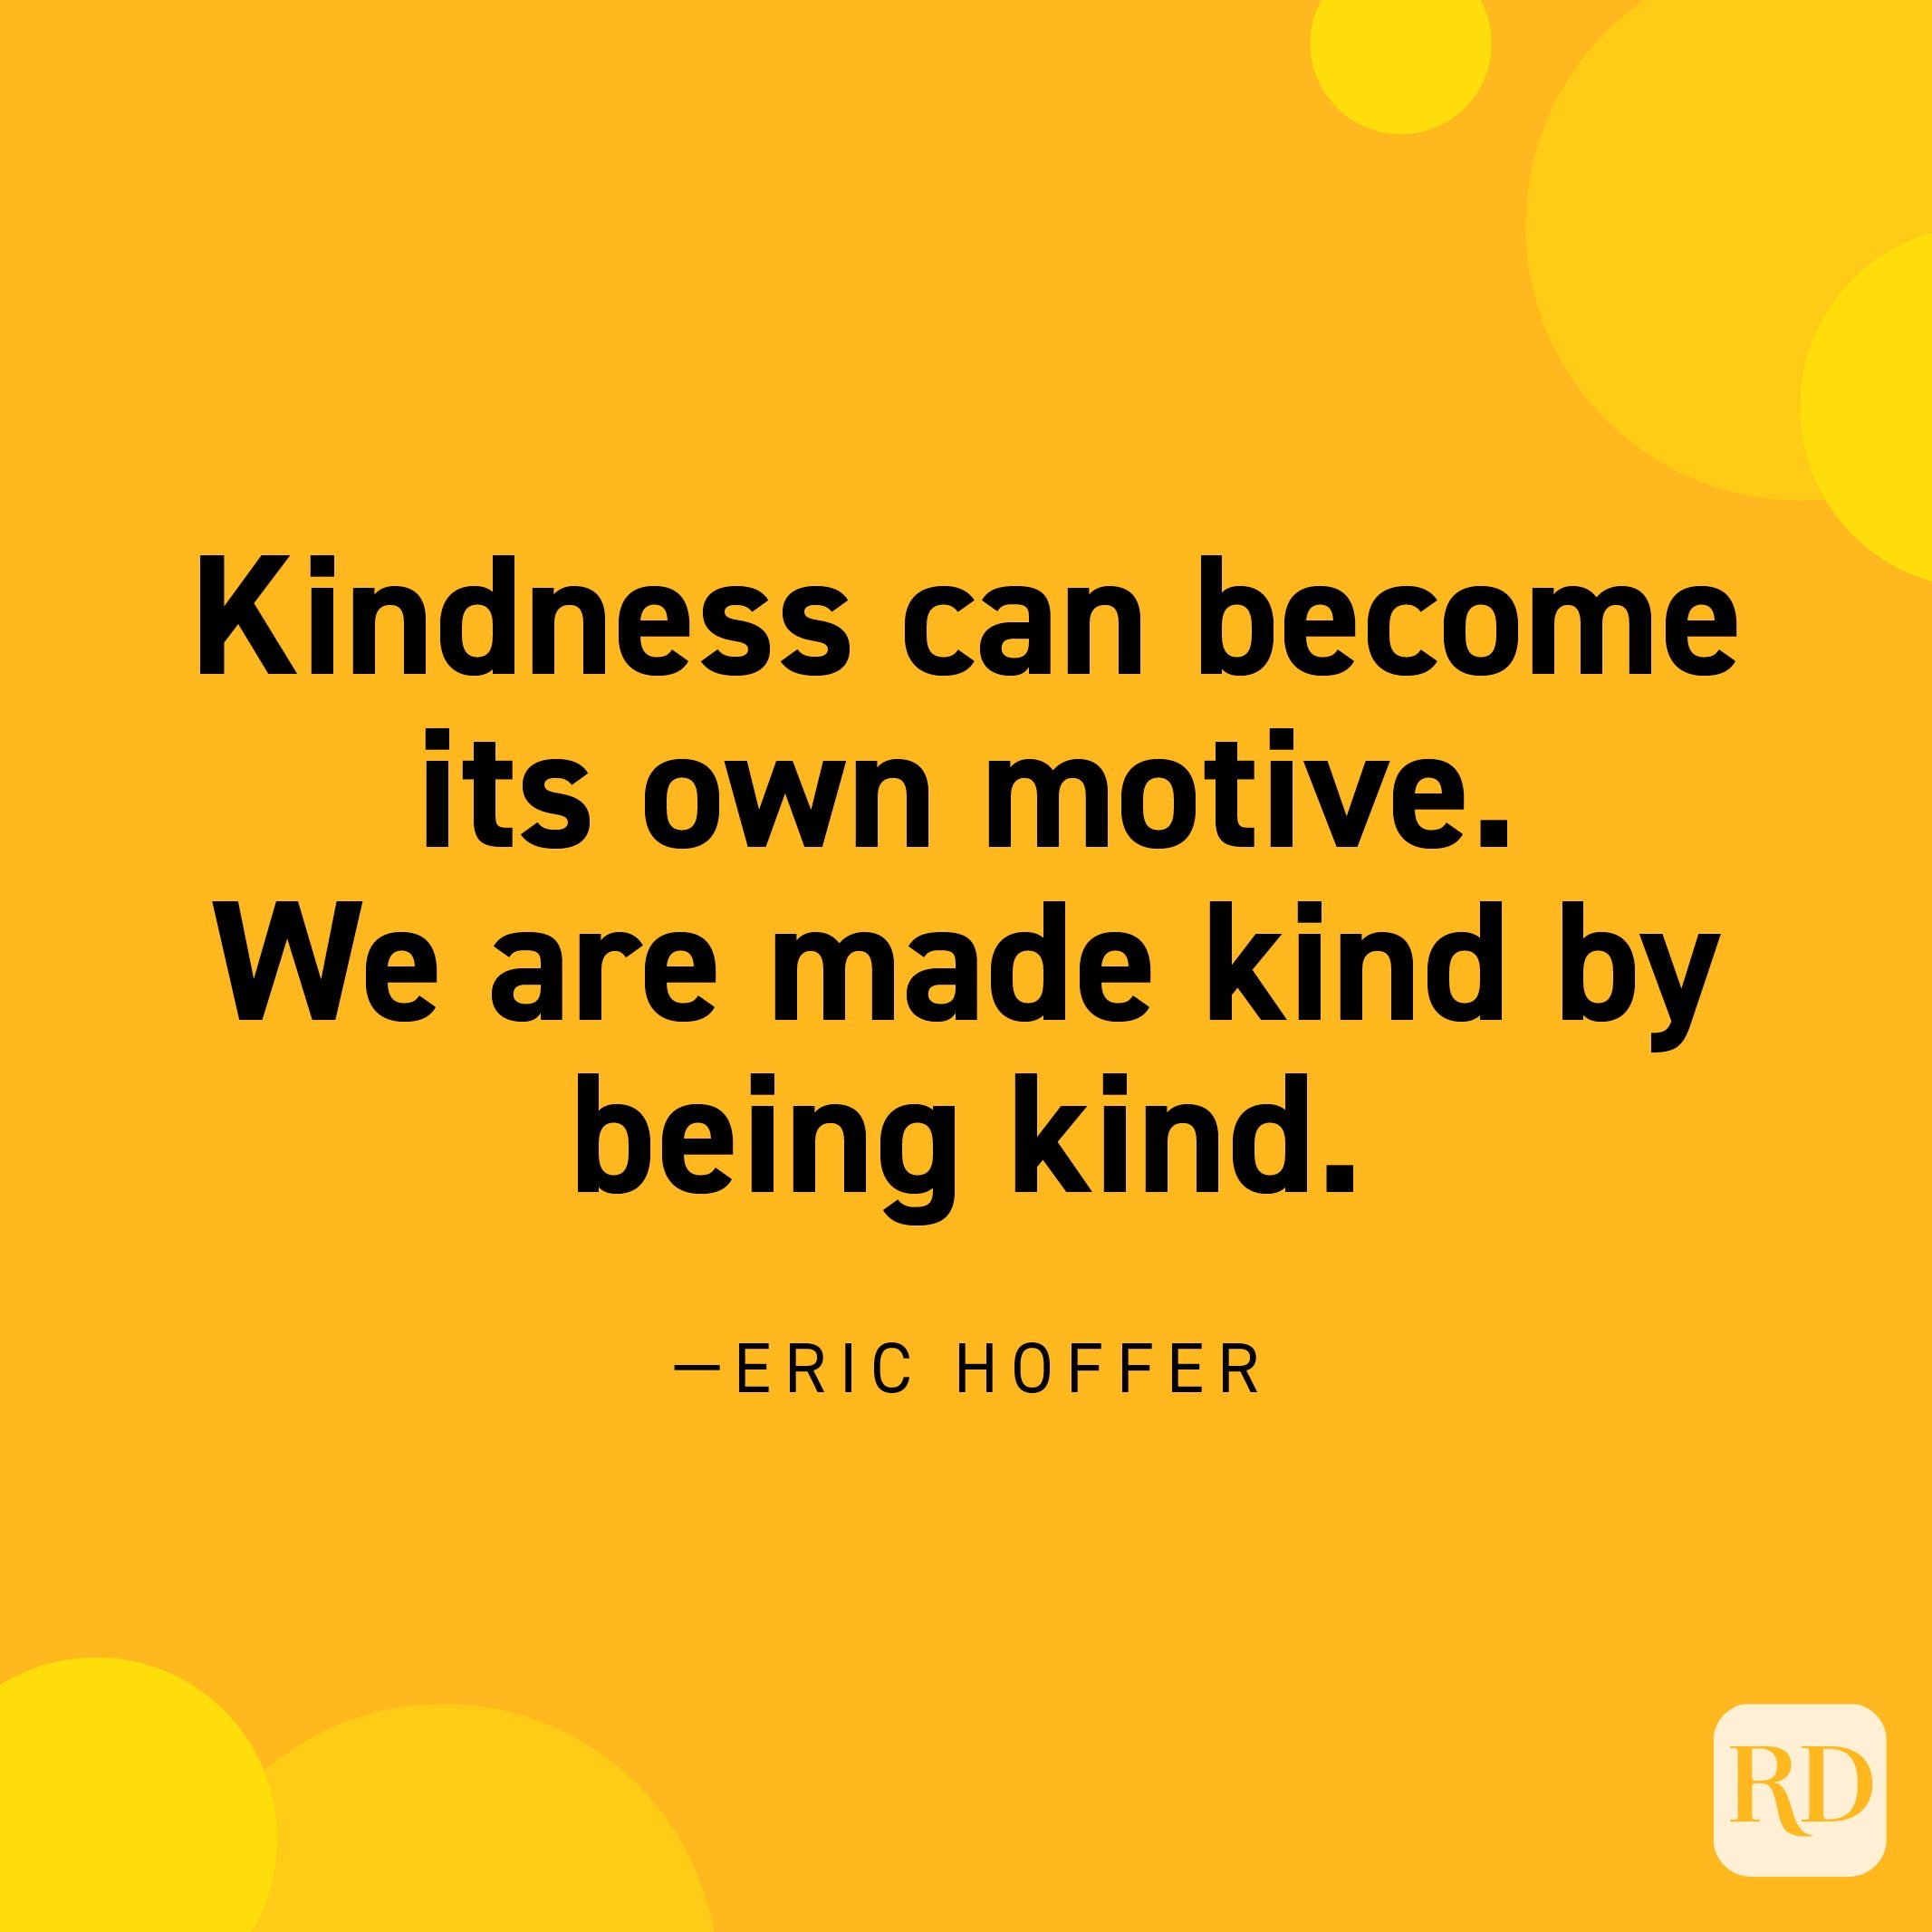 50 Kindness Quotes That Will Stay With You | Reader's Digest